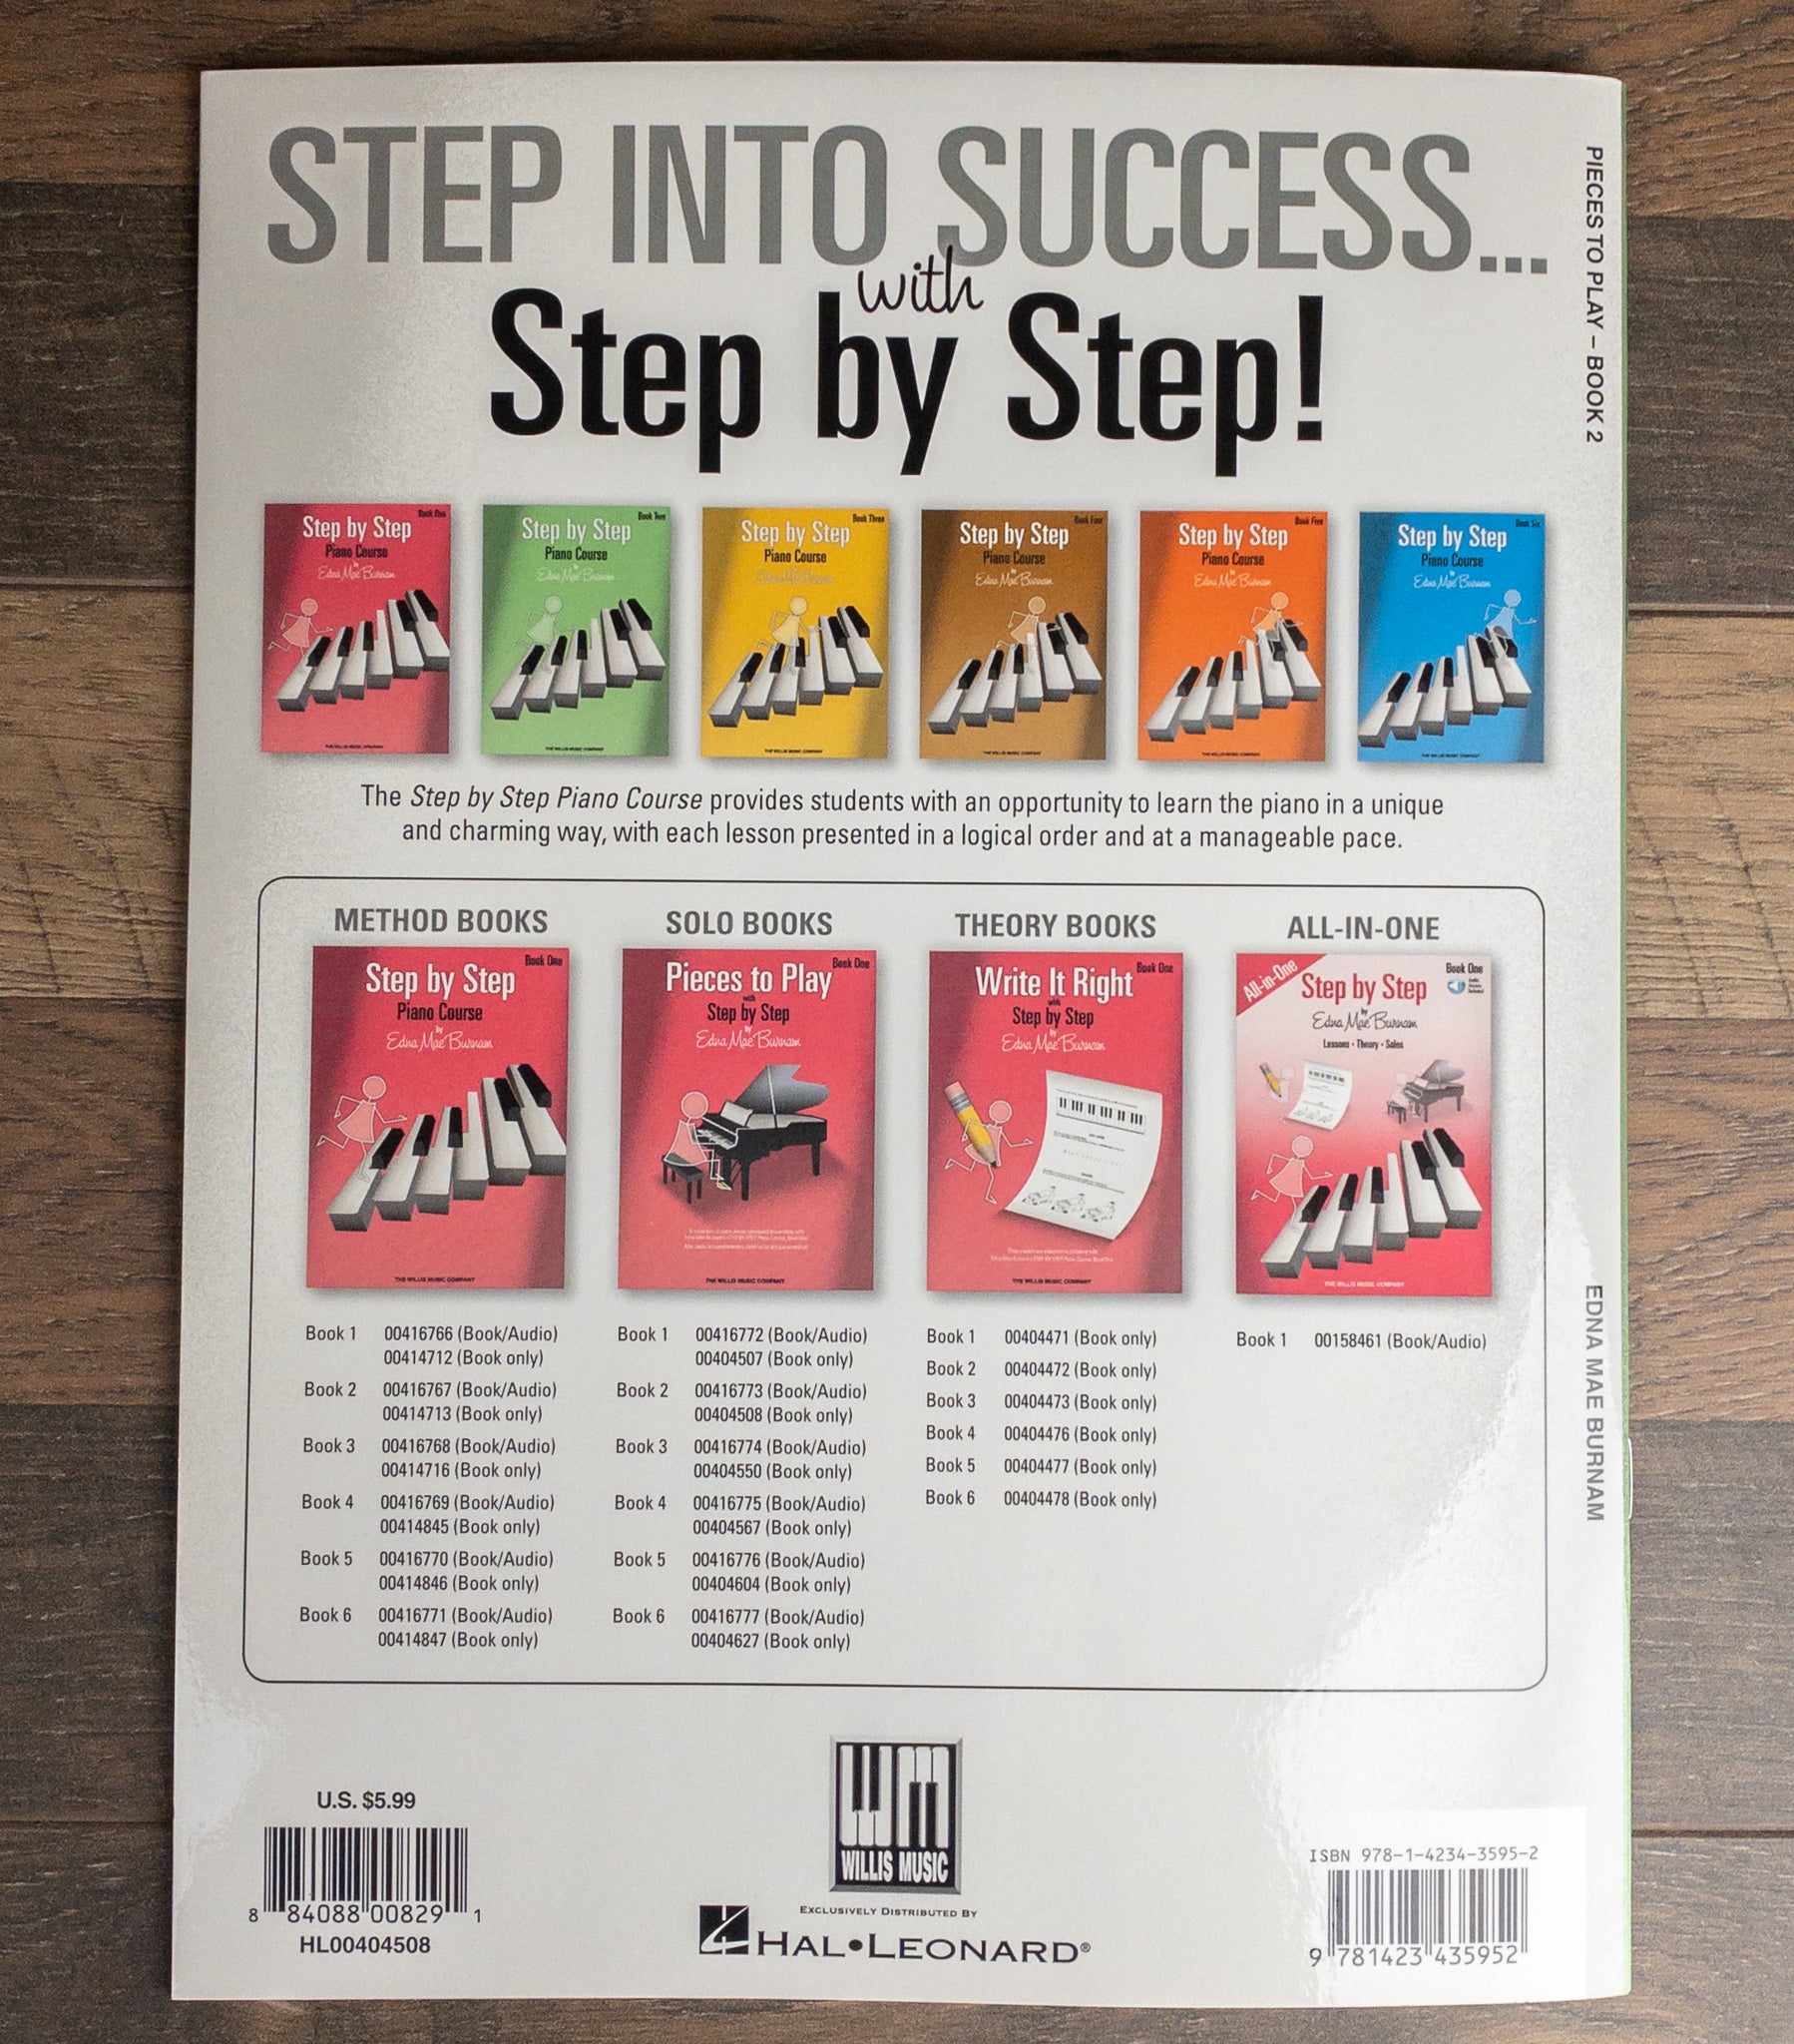 Pieces to Play with Step by Step Book - Bk 2 by Edna Mae Burnam Willis Music Co